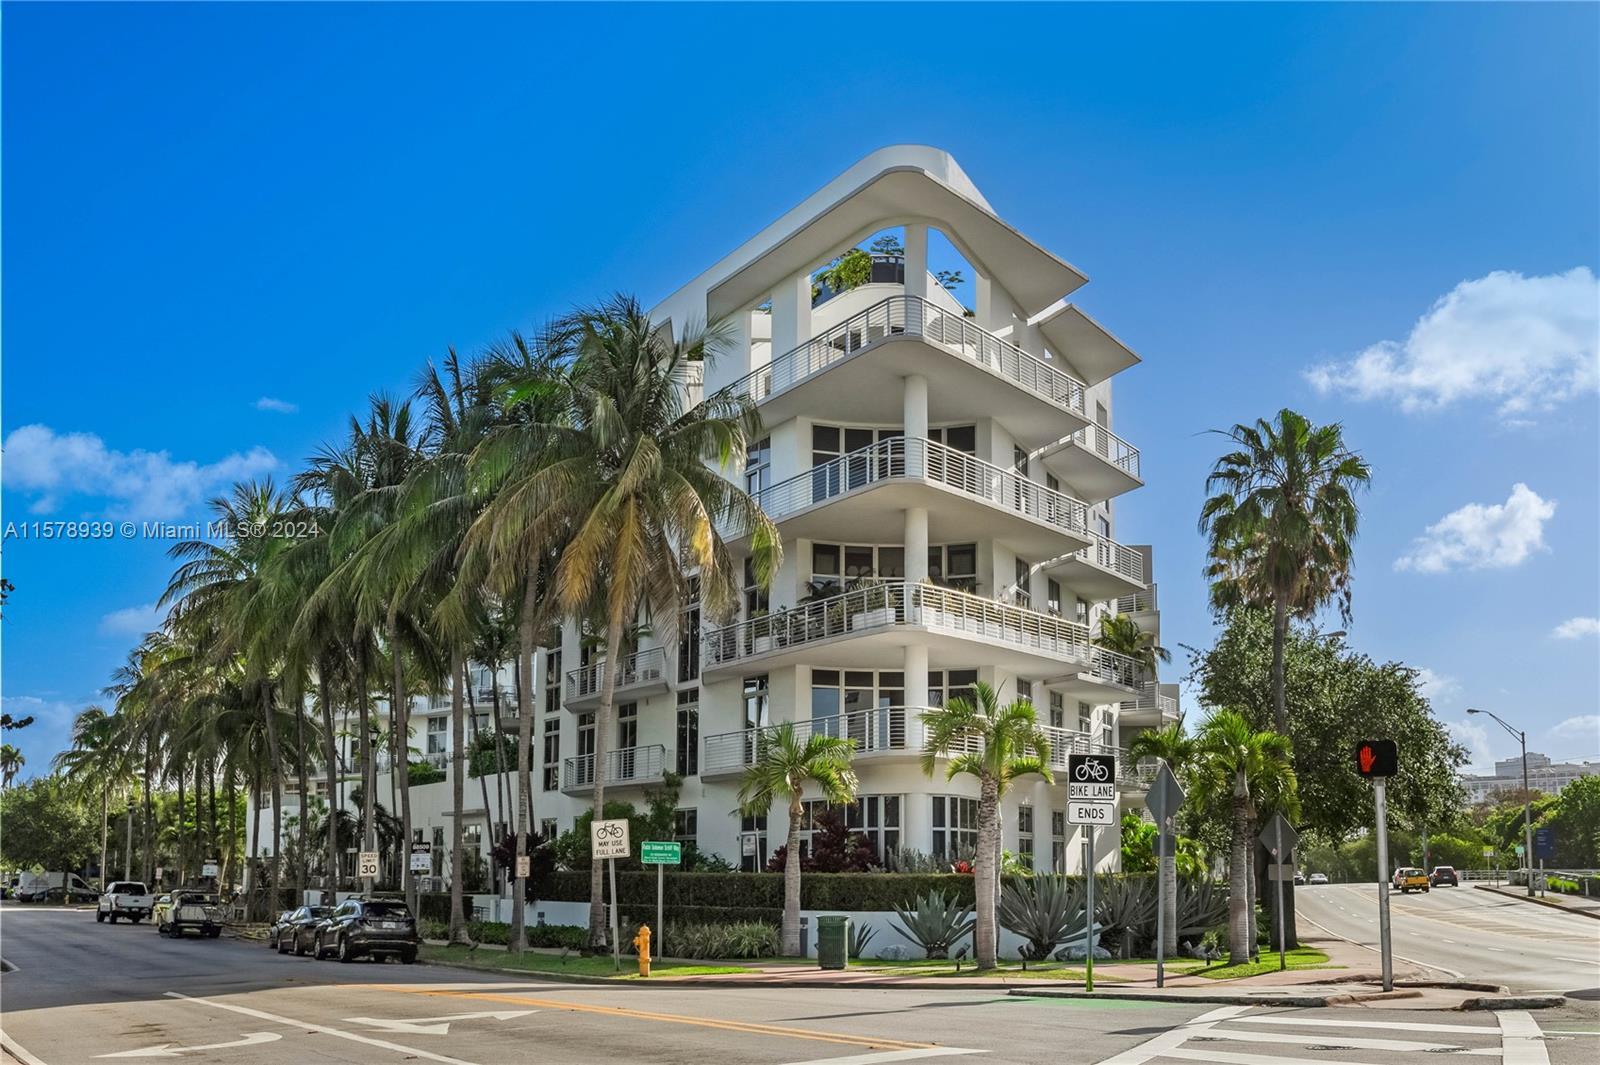 Welcome to The Meridian, a luxury building in South Beach. This stunning 1 bedroom plus den 1.5 bath